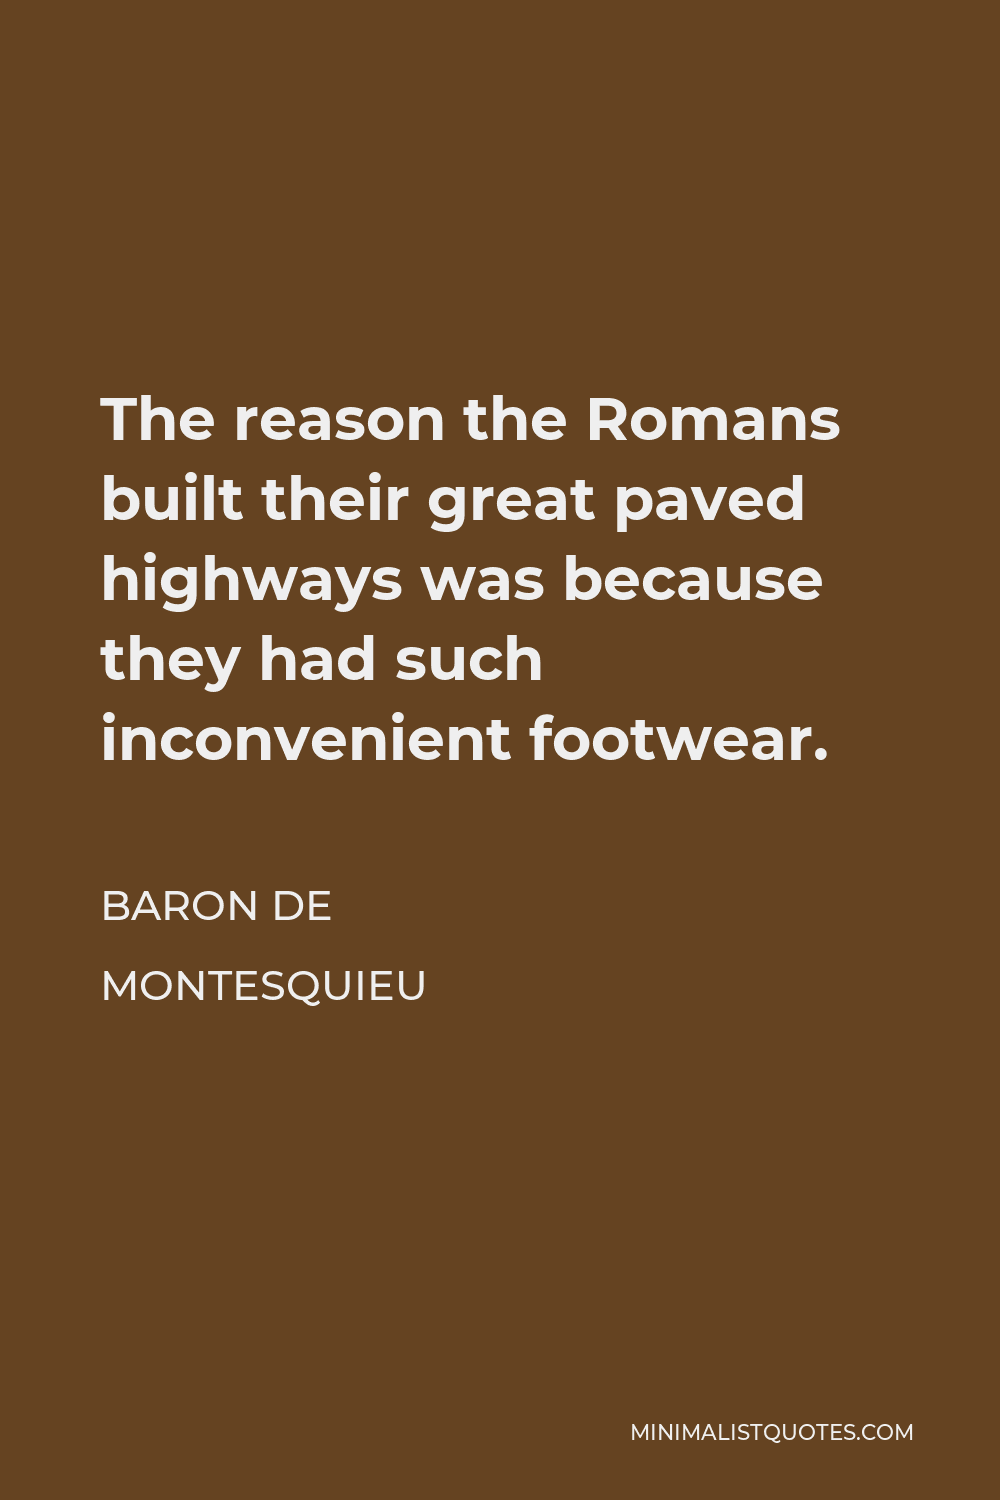 Baron de Montesquieu Quote - The reason the Romans built their great paved highways was because they had such inconvenient footwear.